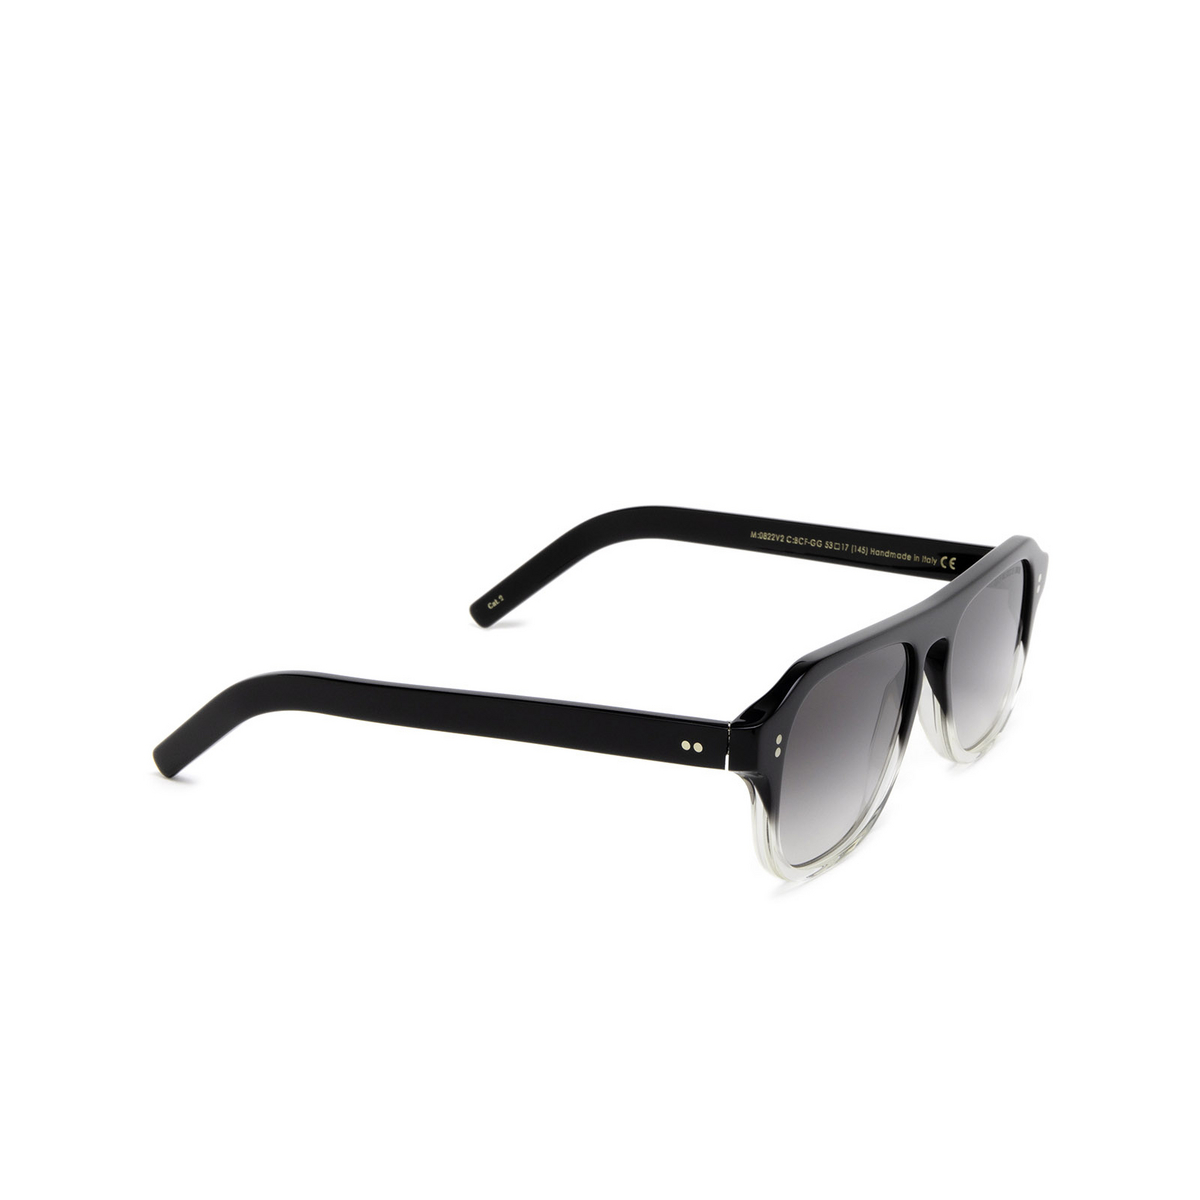 Cutler and Gross® Aviator Sunglasses: 0822V2 SUN color Black To Clear Fade Bcf - three-quarters view.